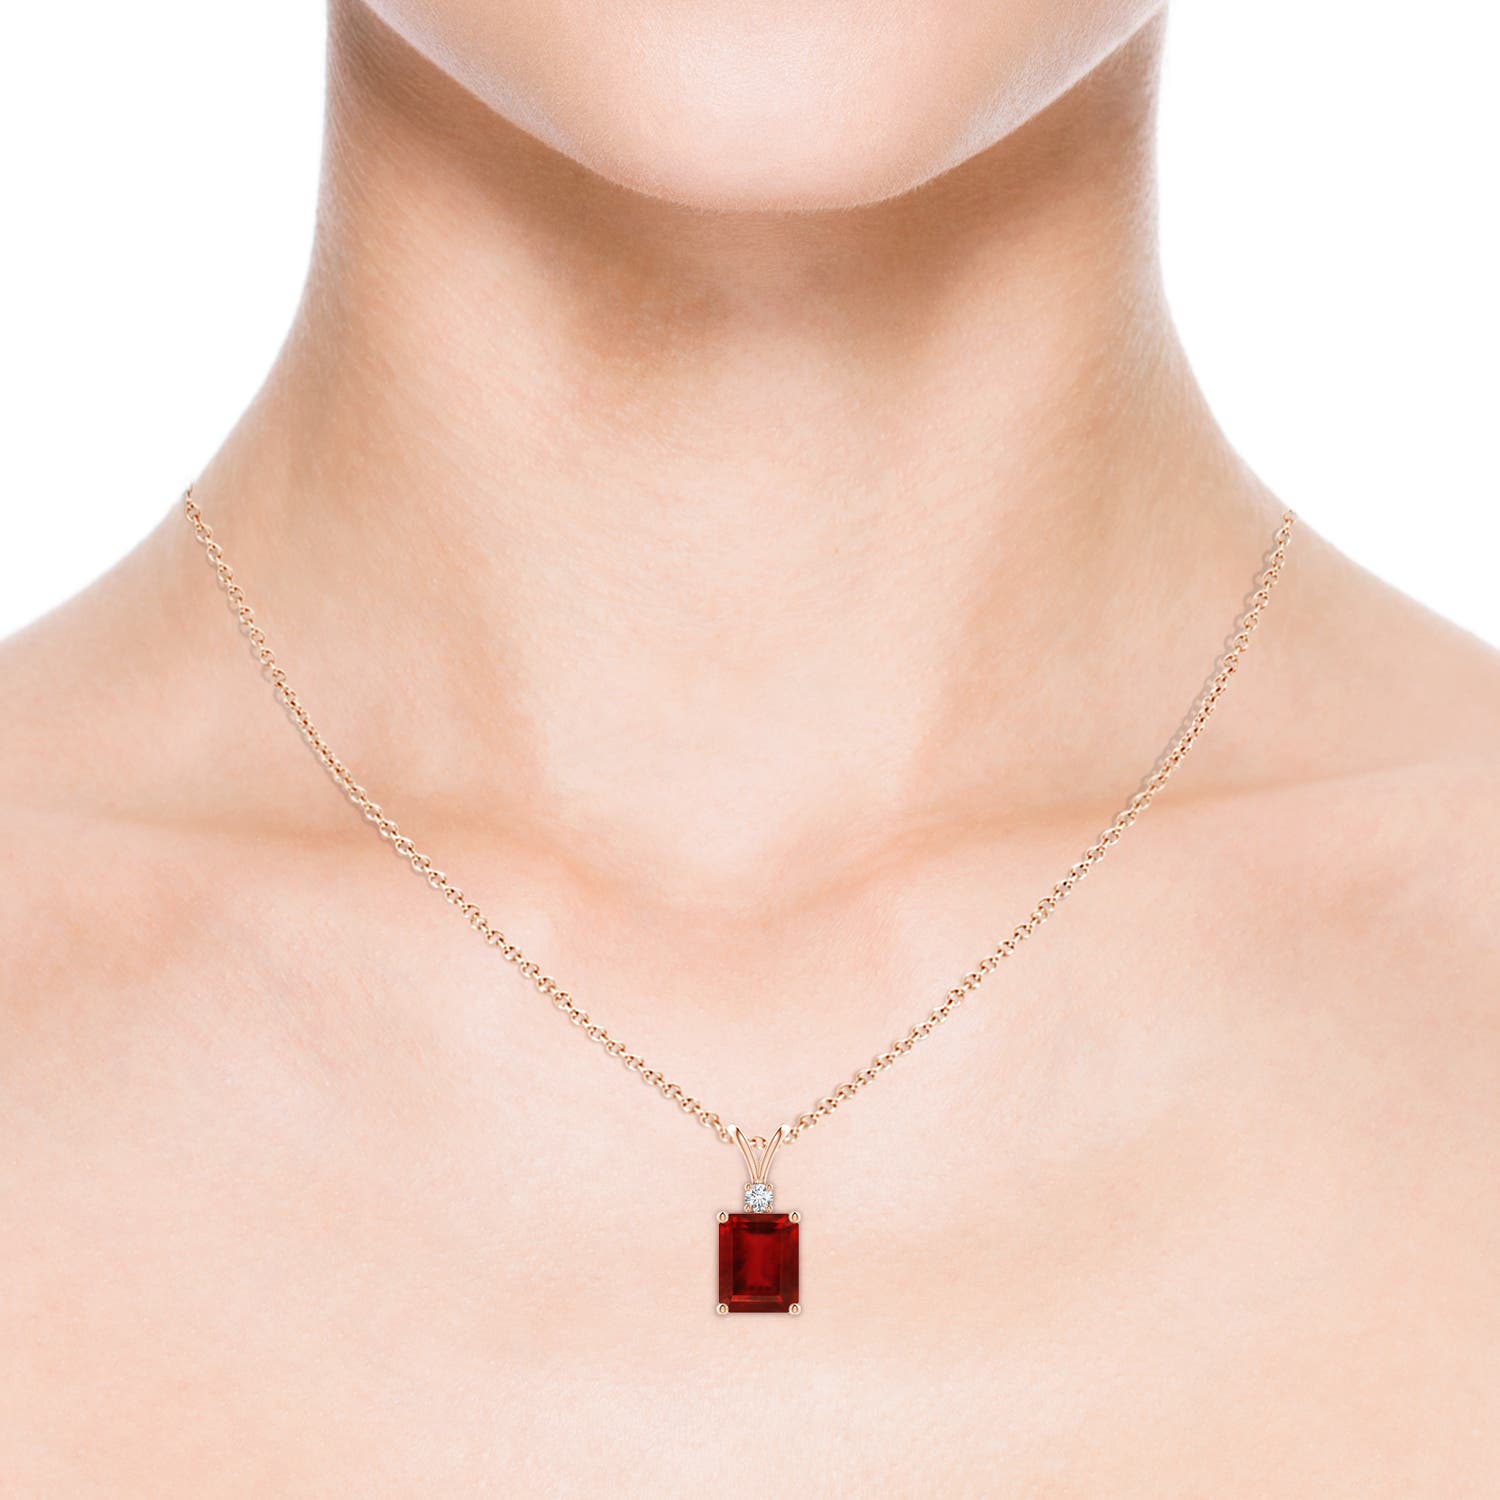 AAAA - Ruby / 4.11 CT / 14 KT Rose Gold